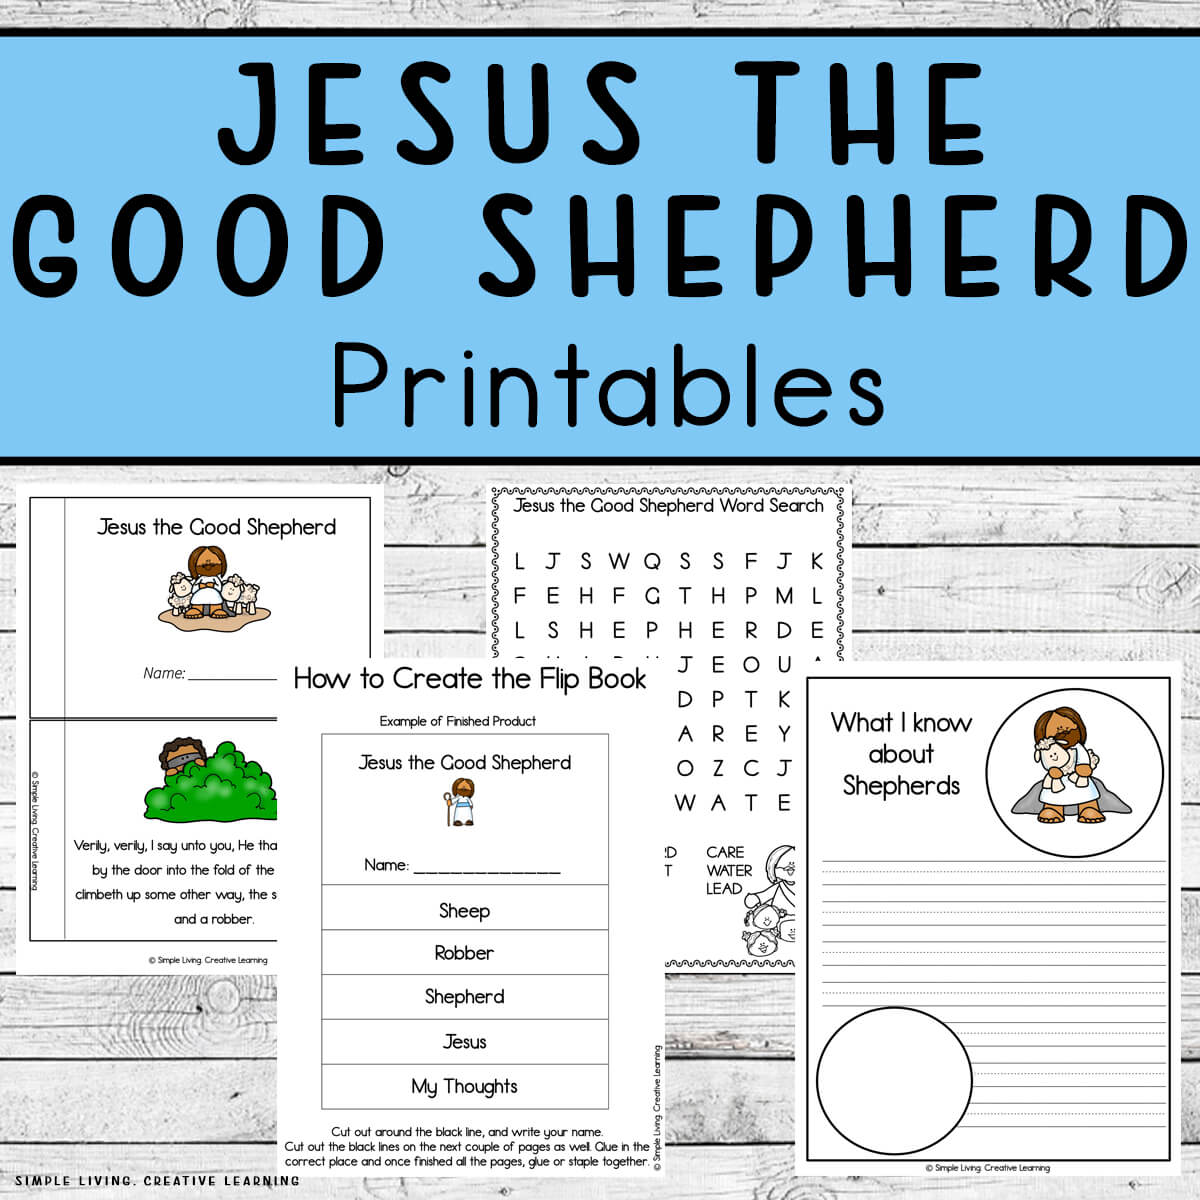 Jesus the Good Shepherd Printables four pages